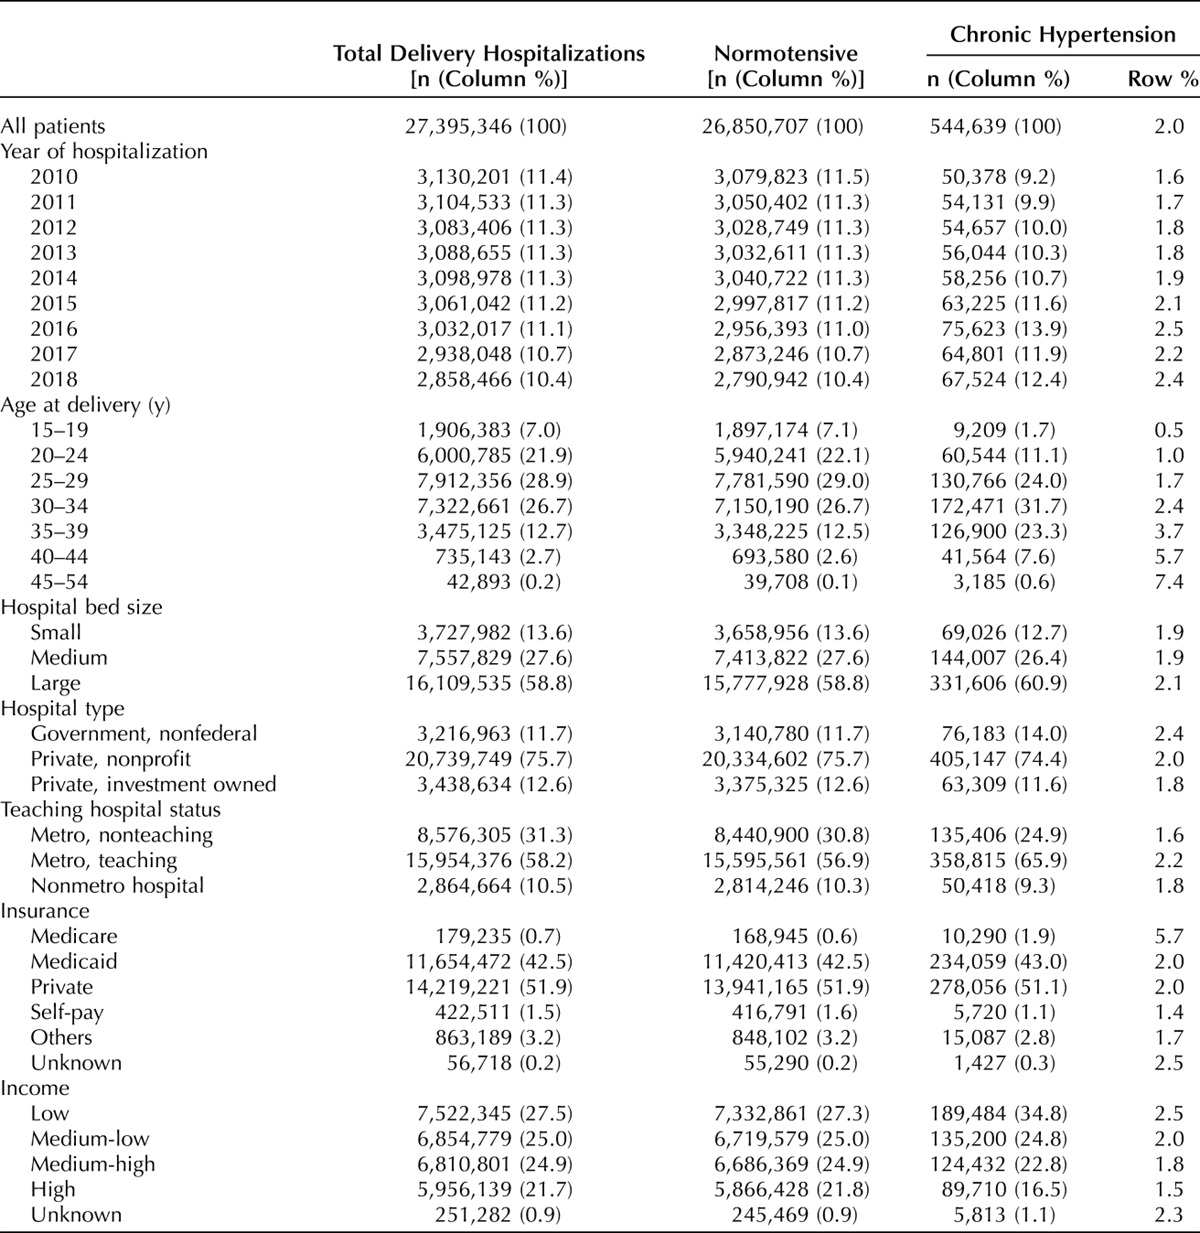 Chronic Hypertension and the Risk of Readmission for Postpartum Cardiovascular Complications